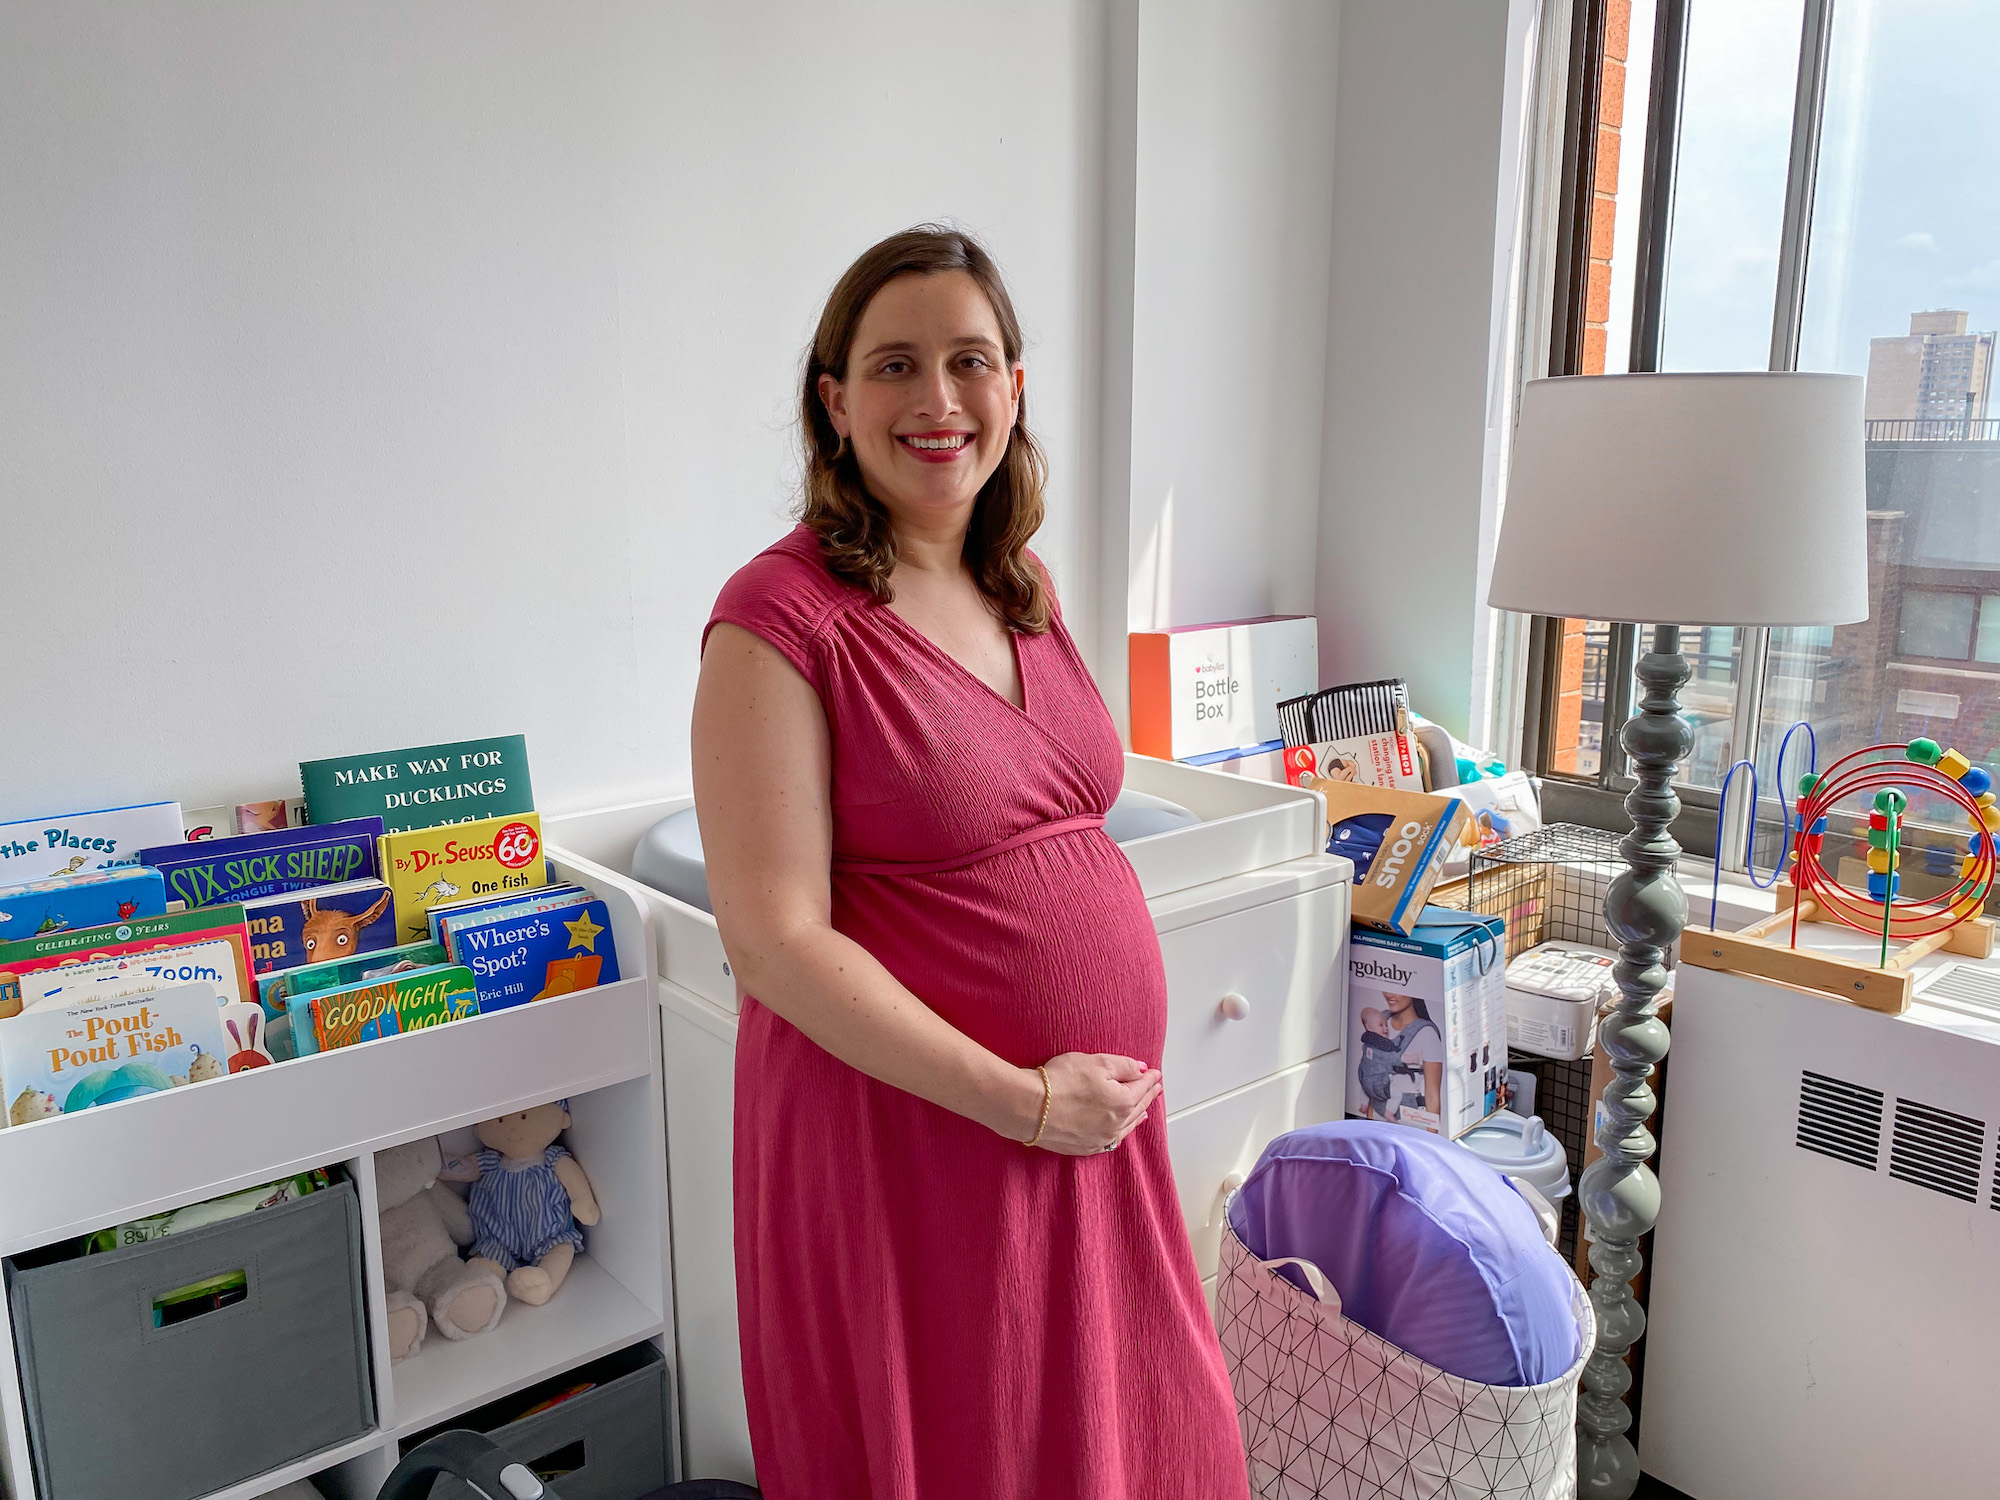 Why We Chose Babylist for Our Baby Registry